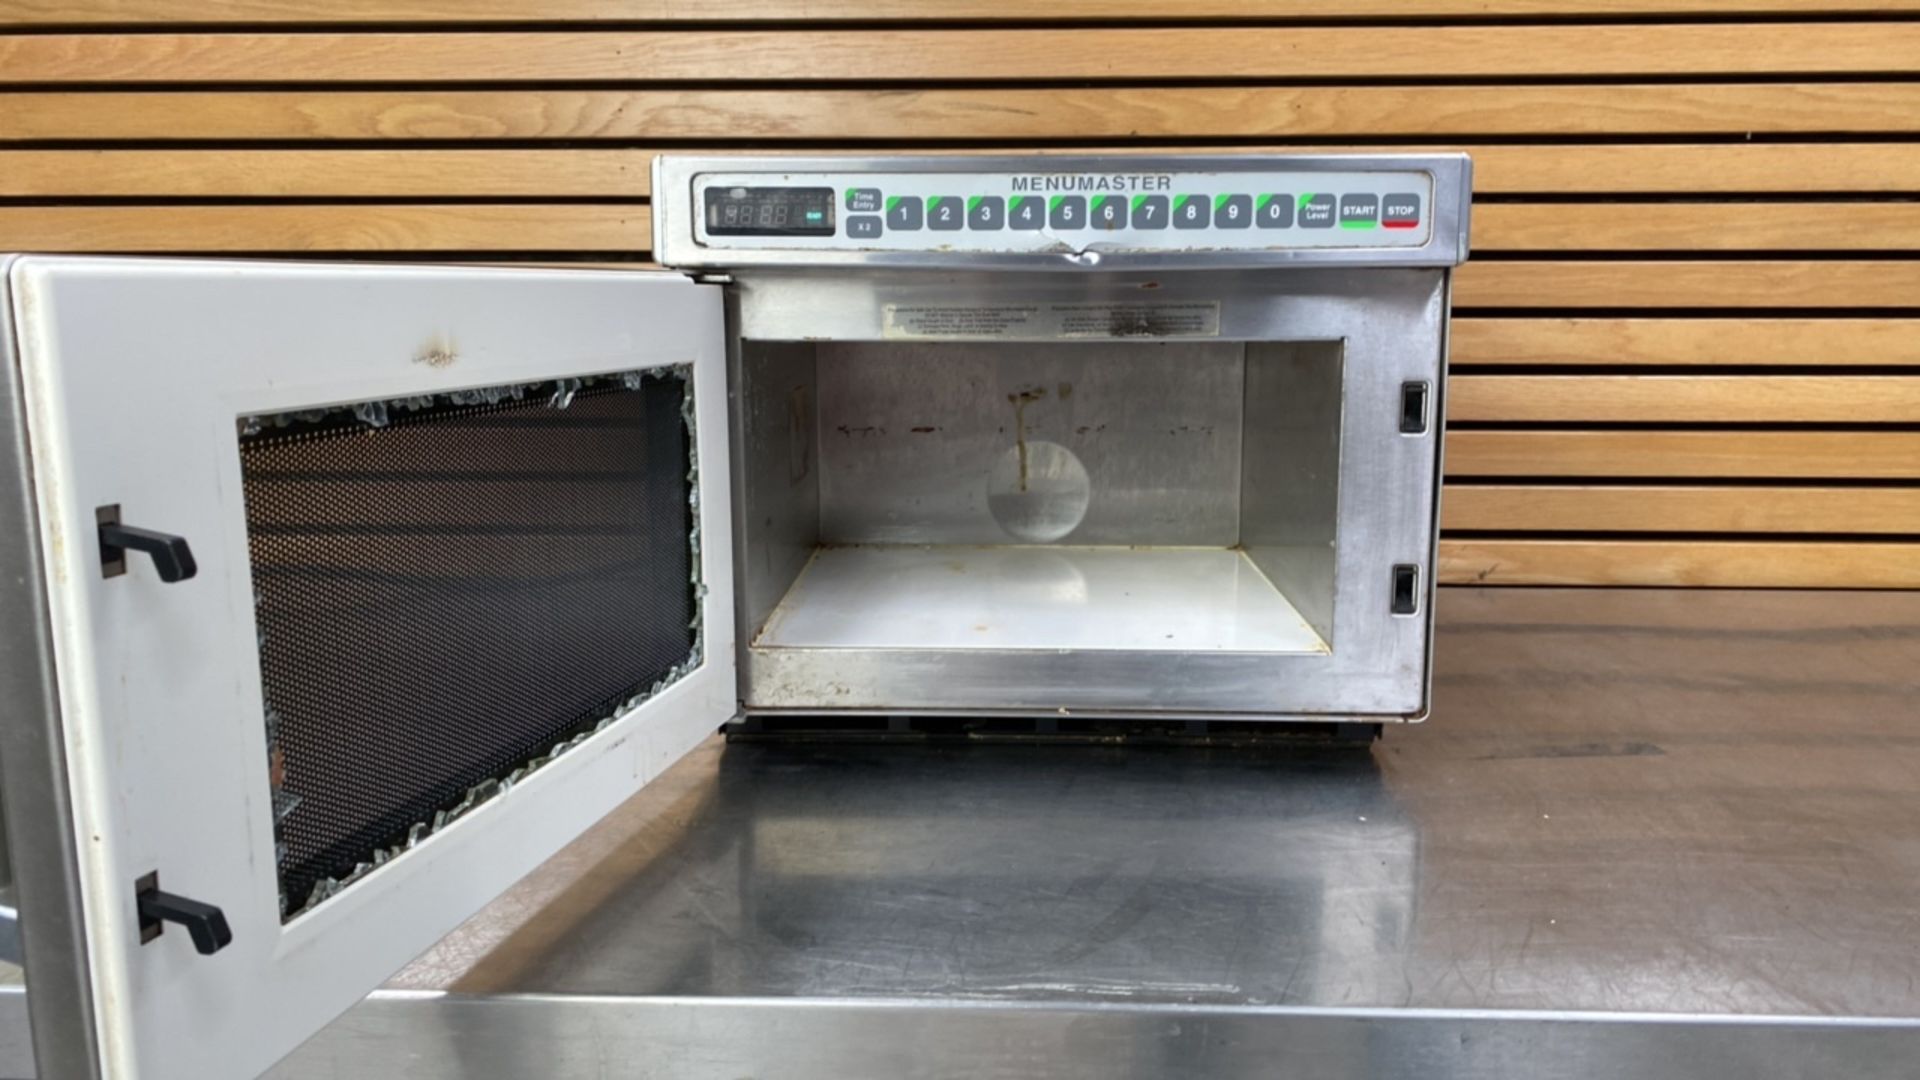 Menumaster Commercial Microwave Oven - Image 2 of 4